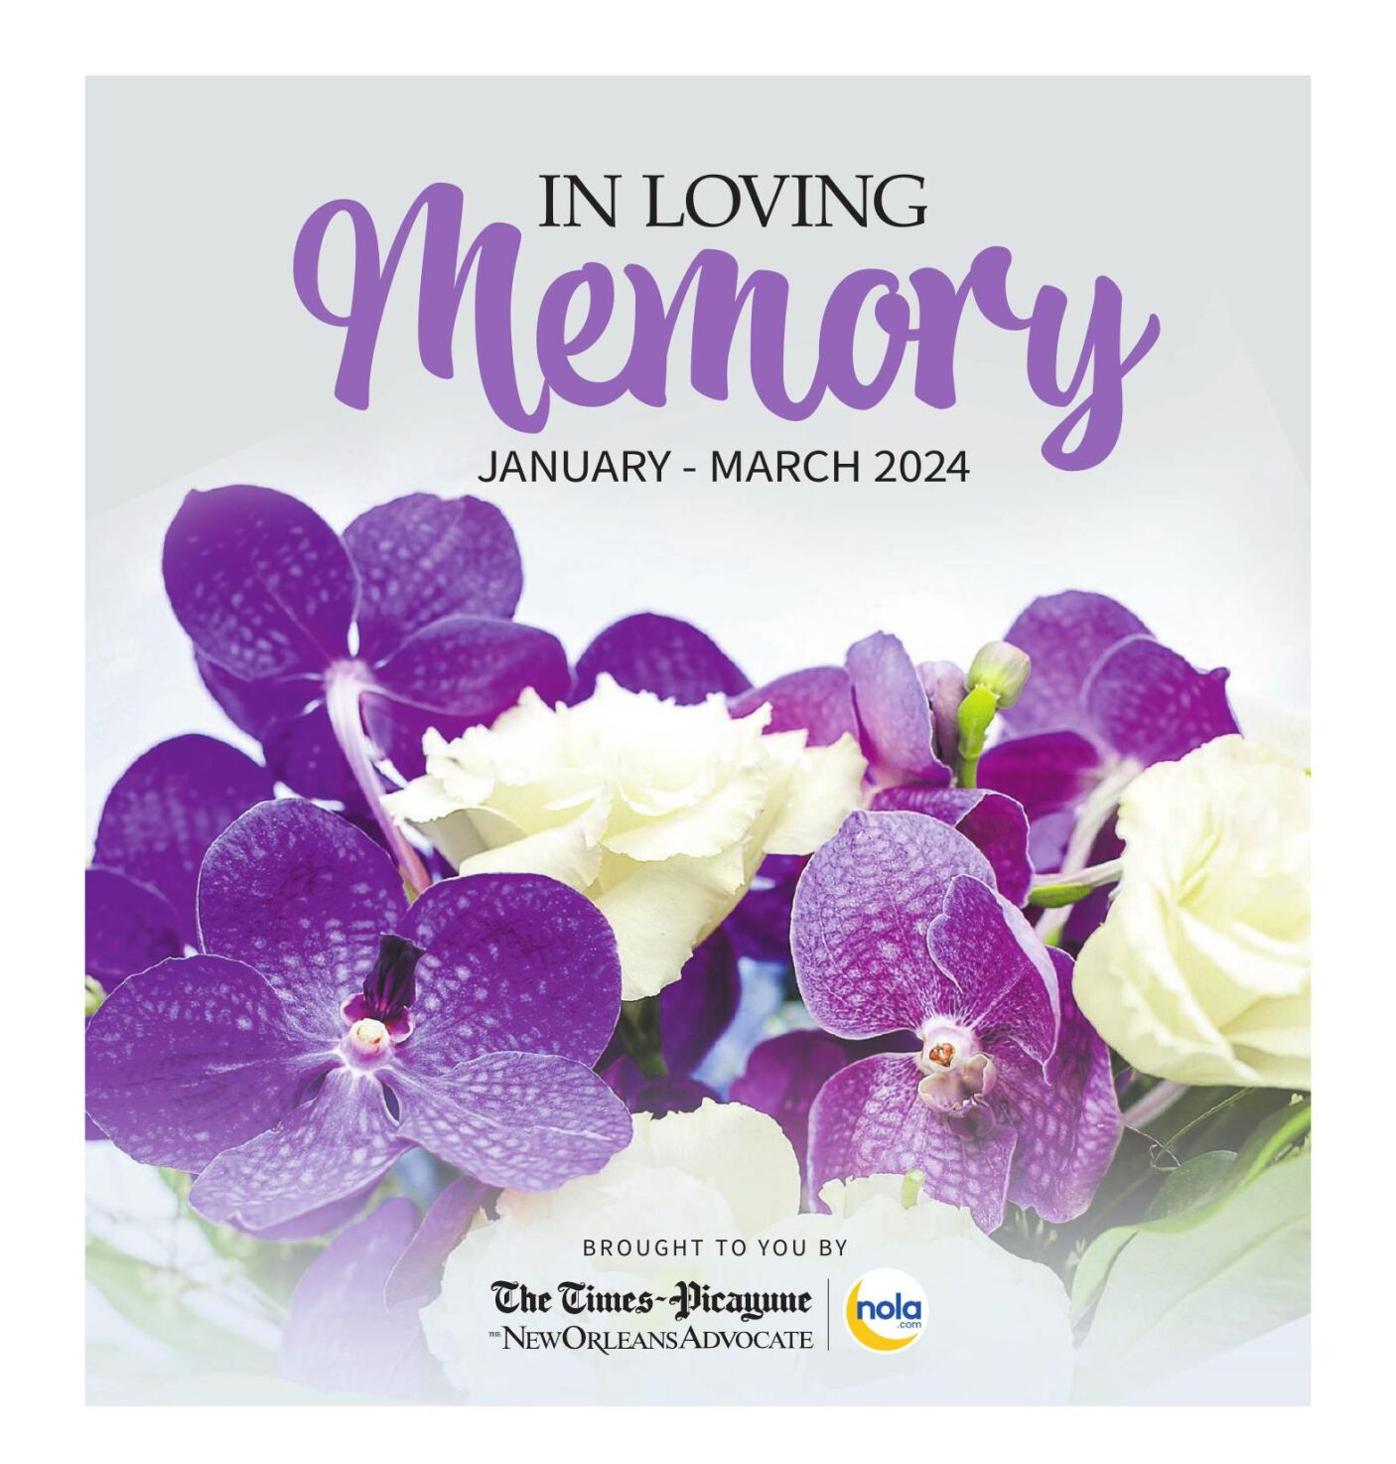 In Loving Memory January - March 2024